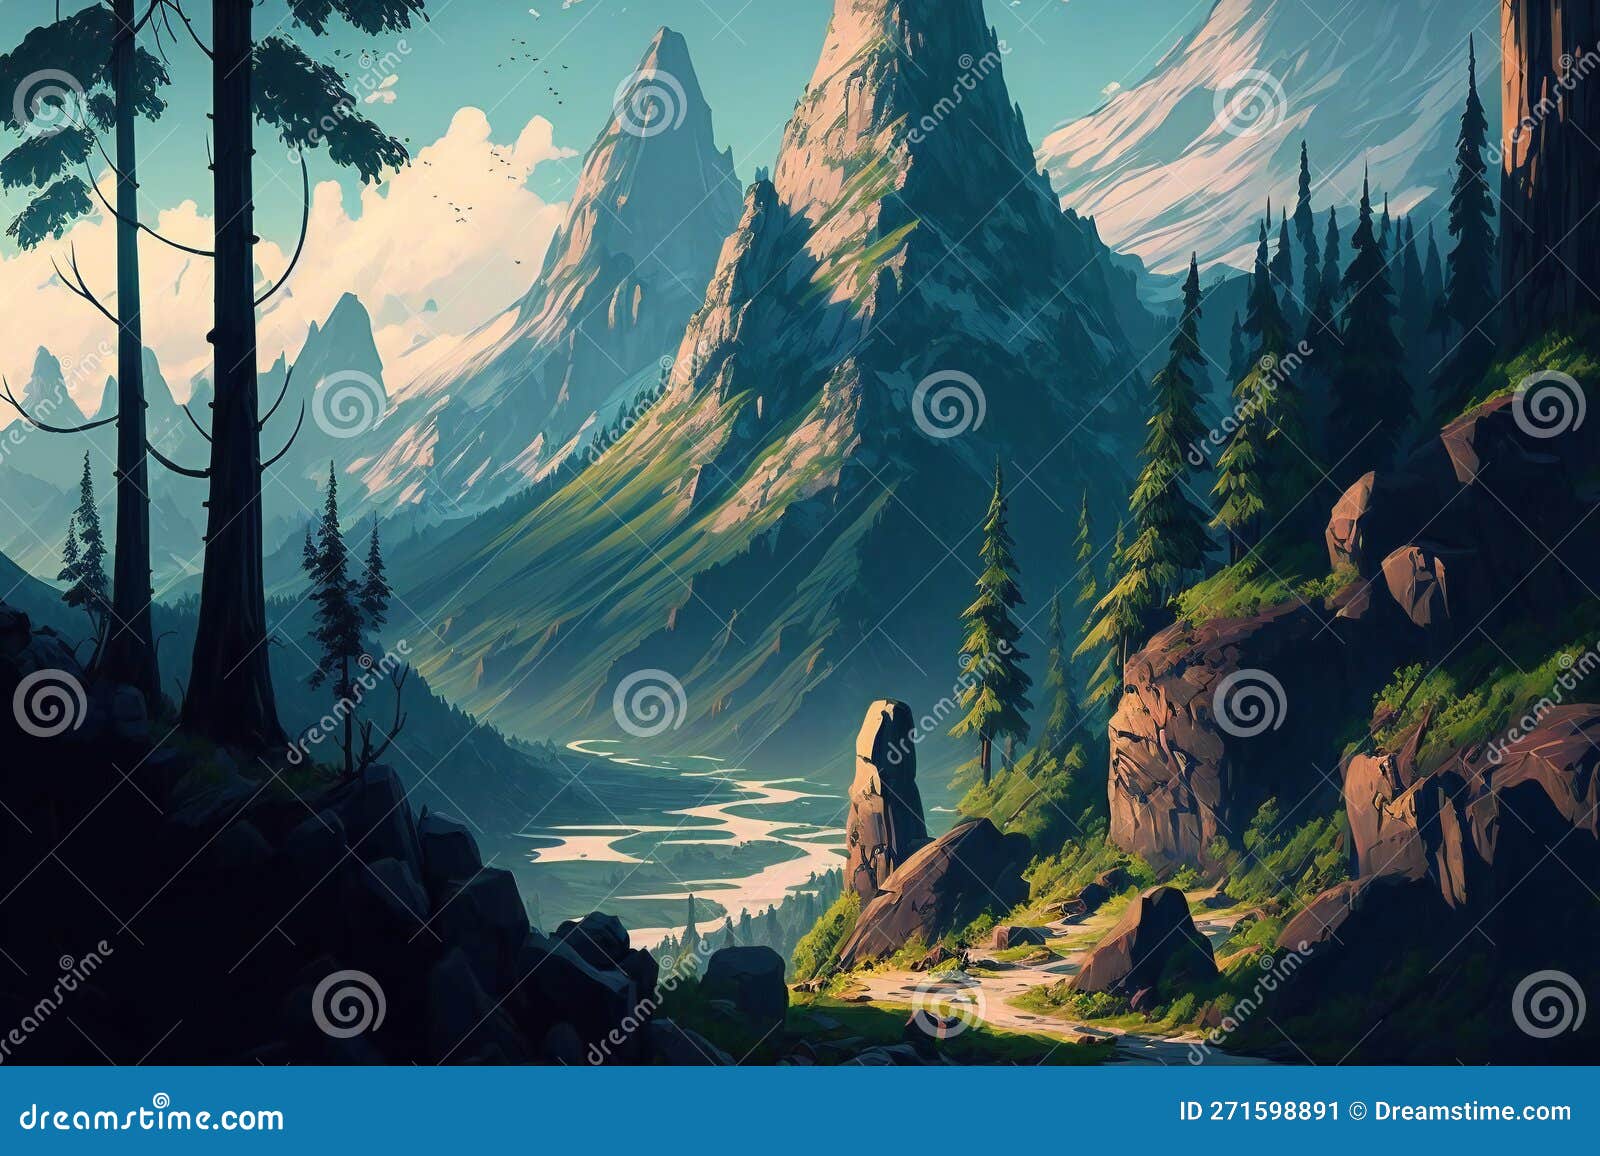 Vector Illustration Of A Lakeside Walkway With Beautiful Mountain Scenery  In The Background In Anime Style, Wallpaper, Of, Background Background  Image And Wallpaper for Free Download